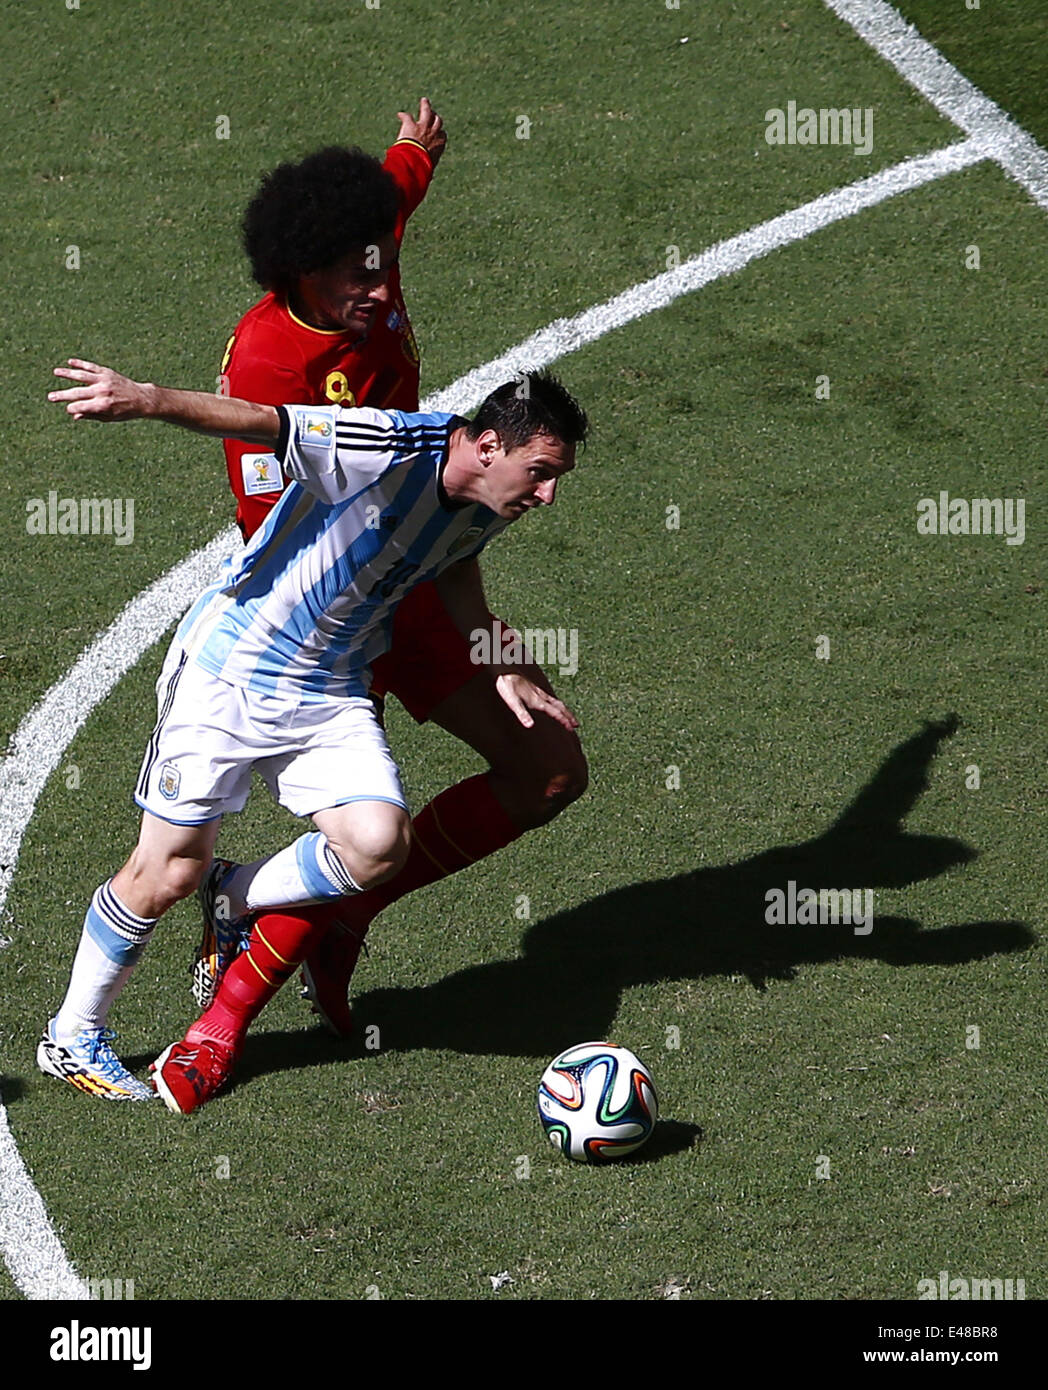 Brasilia, Brazil. 5th July, 2014. Argentina's Lionel Messi (front) vies with Belgium's Marouane Fellaini during a quarter-finals match between Argentina and Belgium of 2014 FIFA World Cup at the Estadio Nacional Stadium in Brasilia, Brazil, on July 5, 2014. Credit:  Liu Bin/Xinhua/Alamy Live News Stock Photo